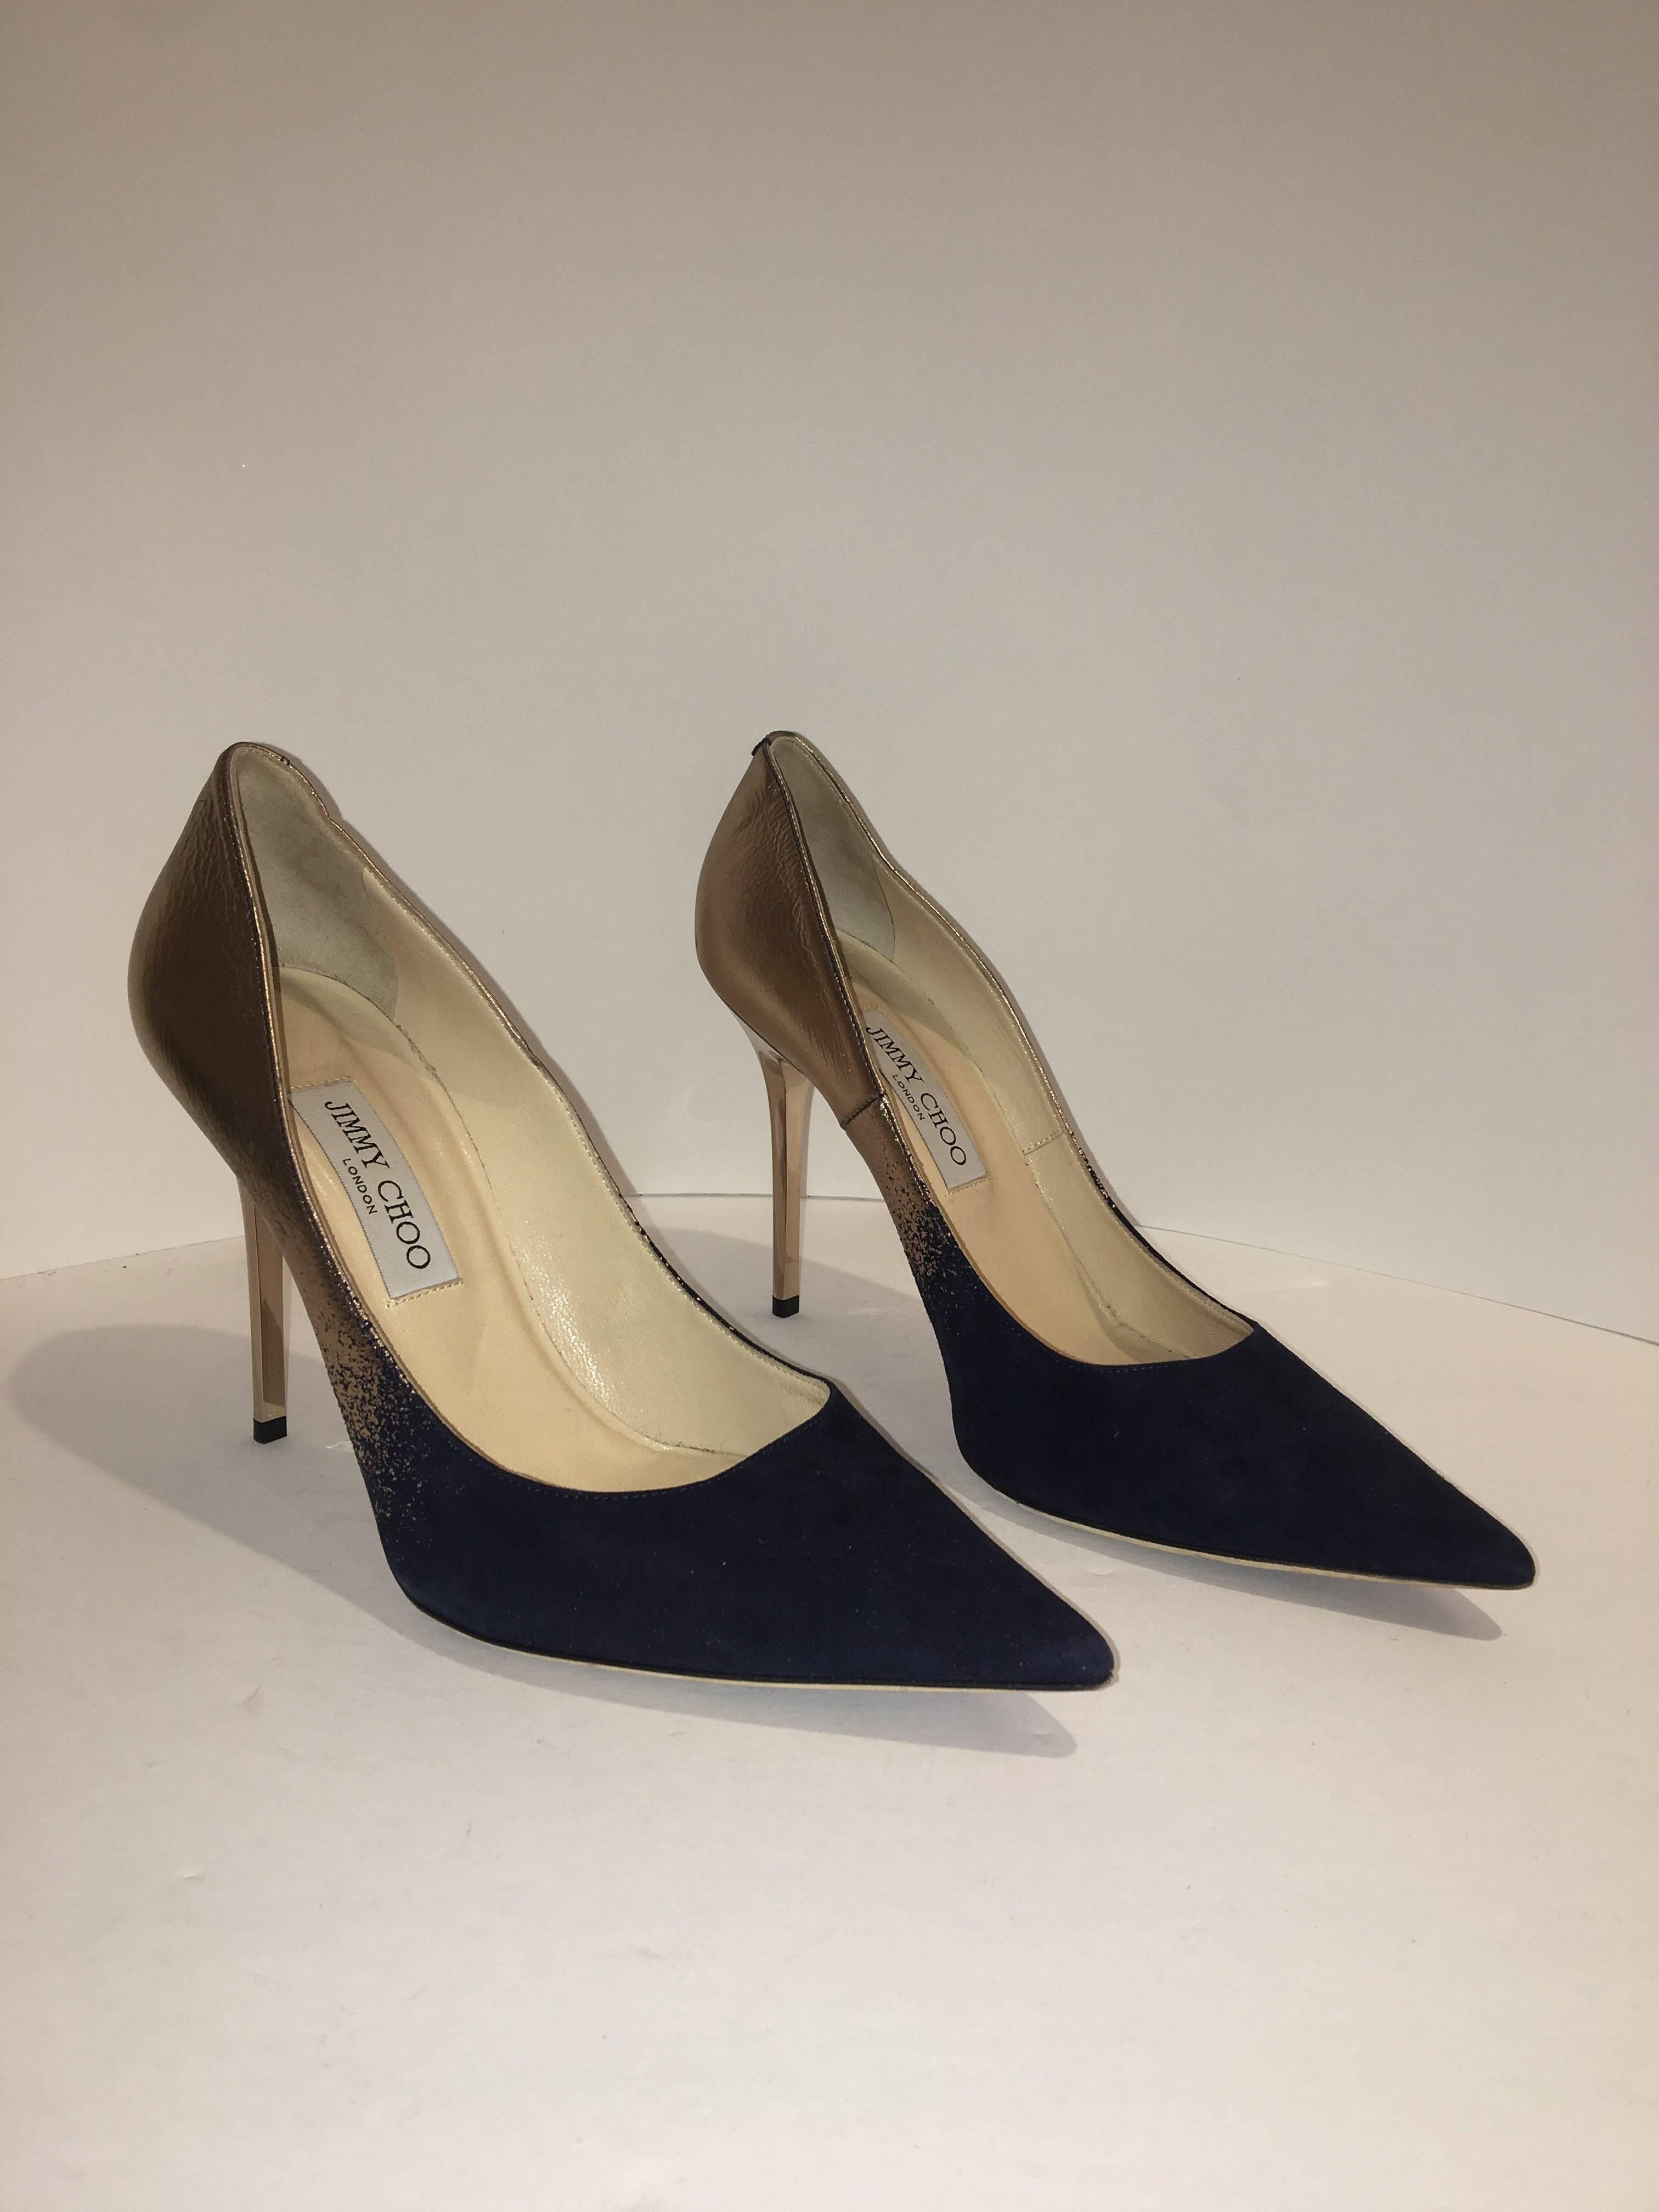 Jimmy Choo Pointed Toe Pumps in Navy Suede with Gold ombre.